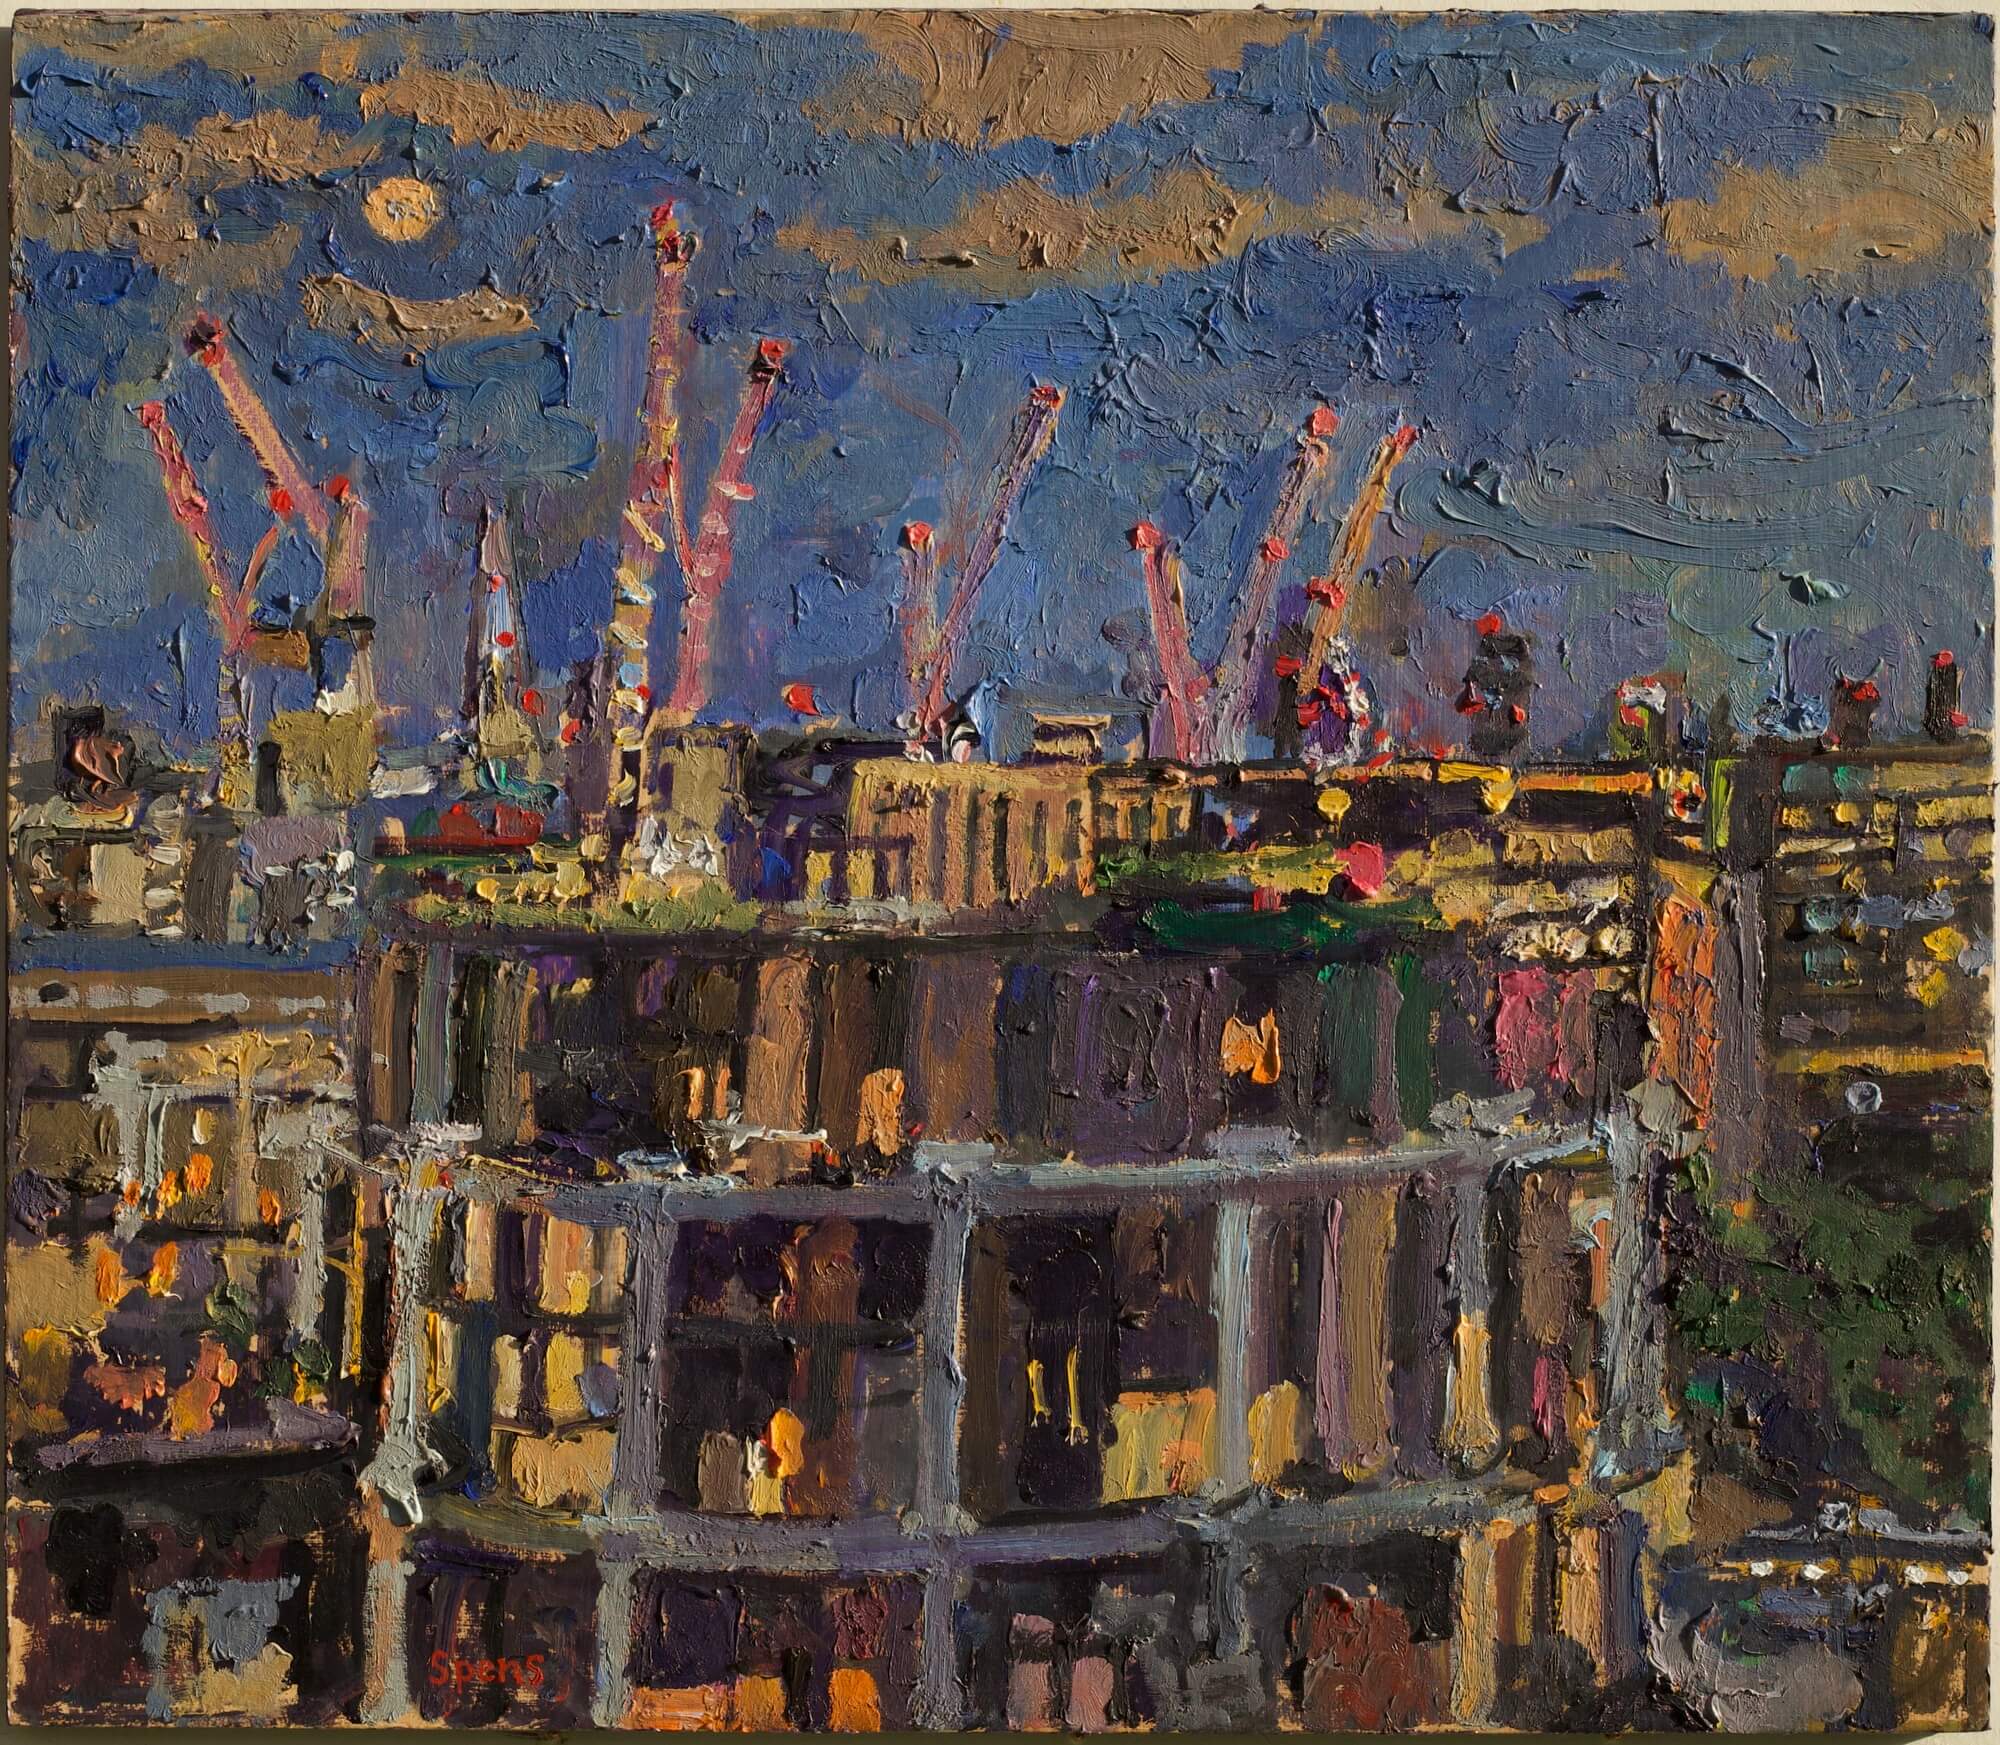 Moon, Gasometers from Tapestry Apartments 30.8 x 35.1 cm